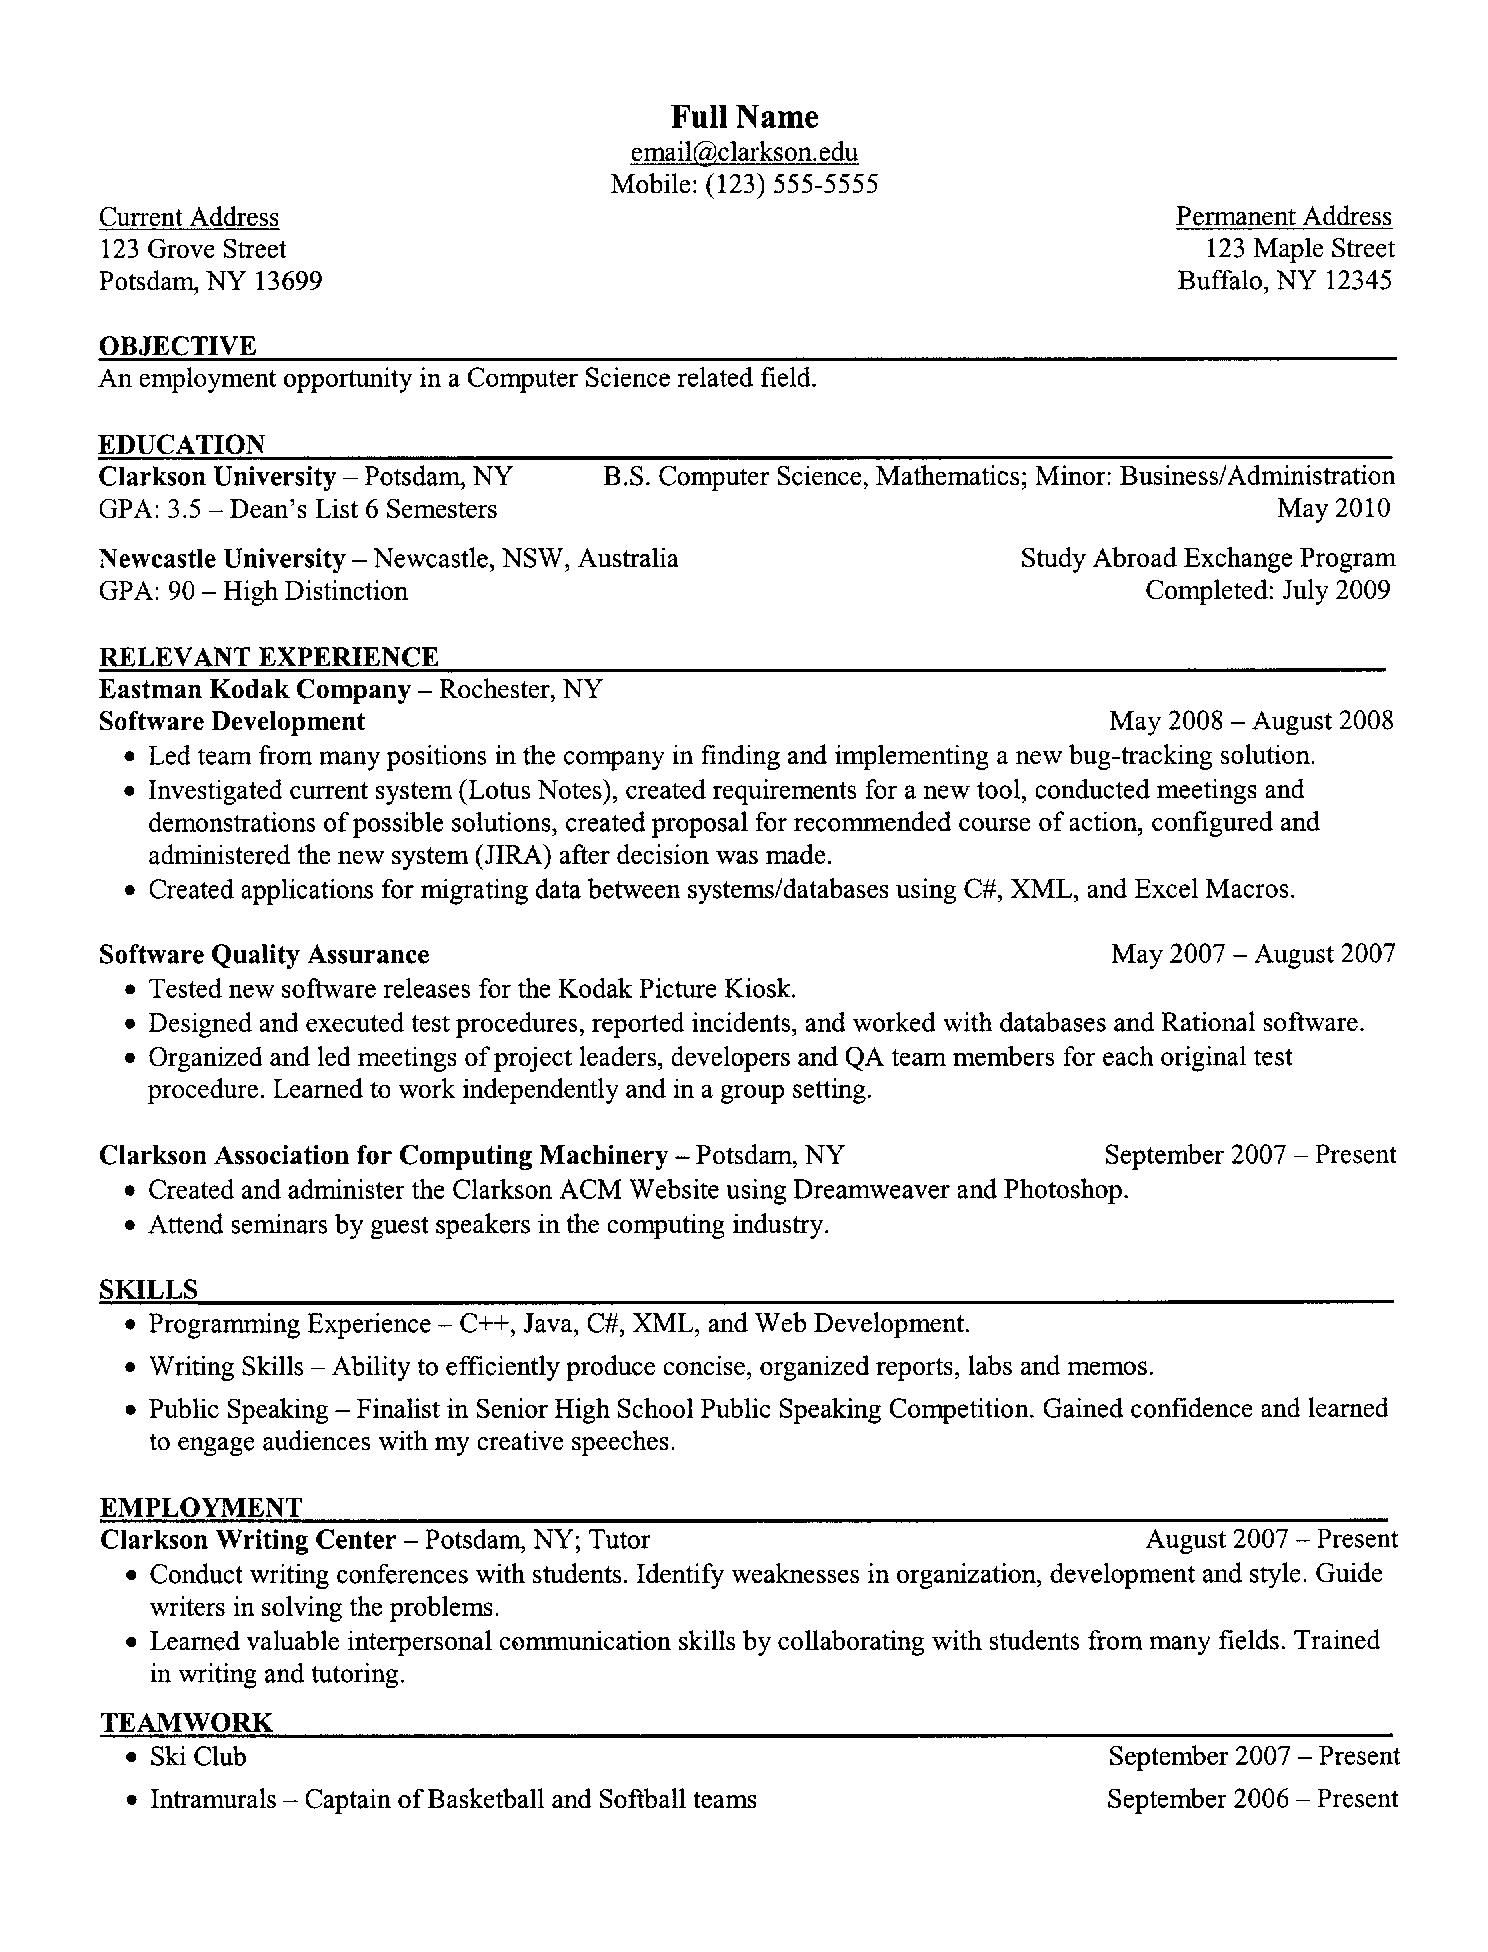 Computer Science Cv Template Akali for dimensions 1488 X 1952